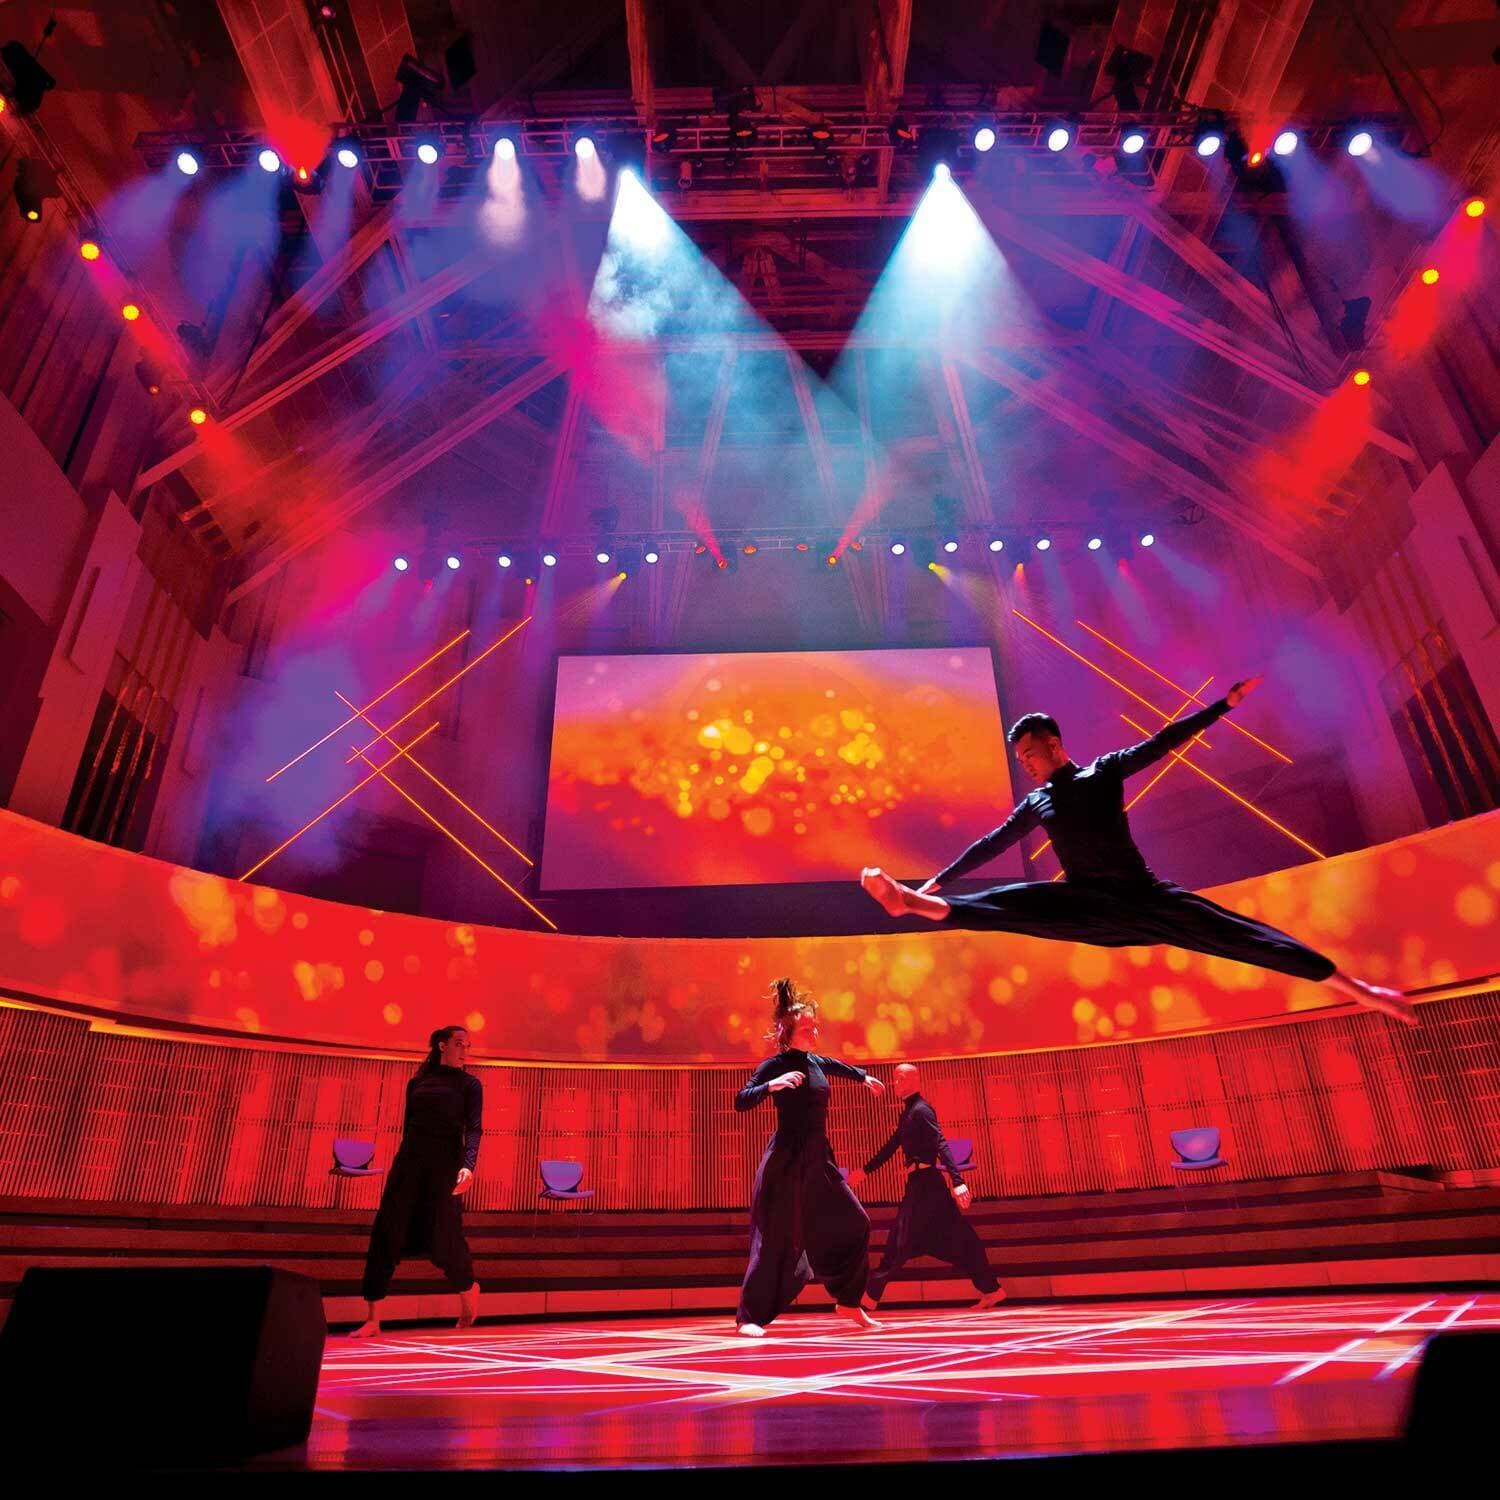 A dancer leaps through the air in front of other performers on a stage lit with shades of orange and red